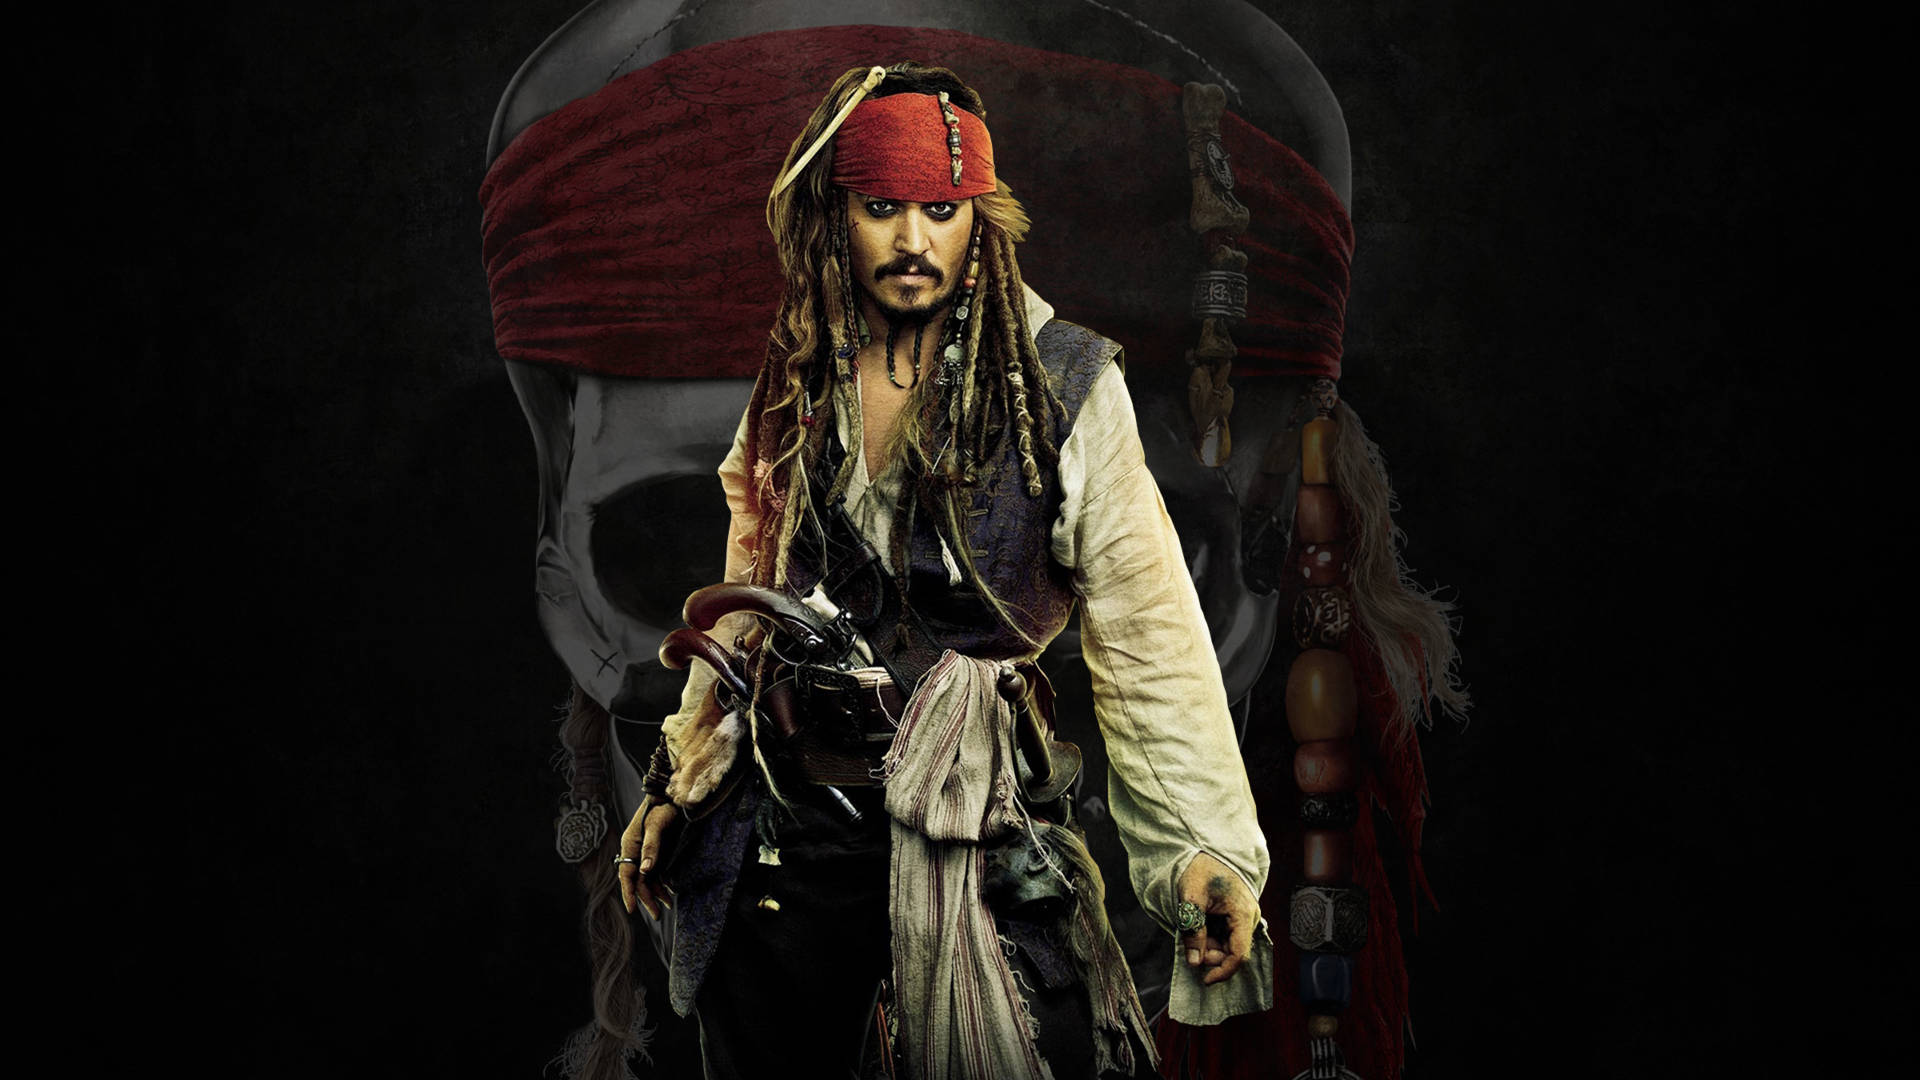 Pirates Of The Caribbean Wallpaper Images